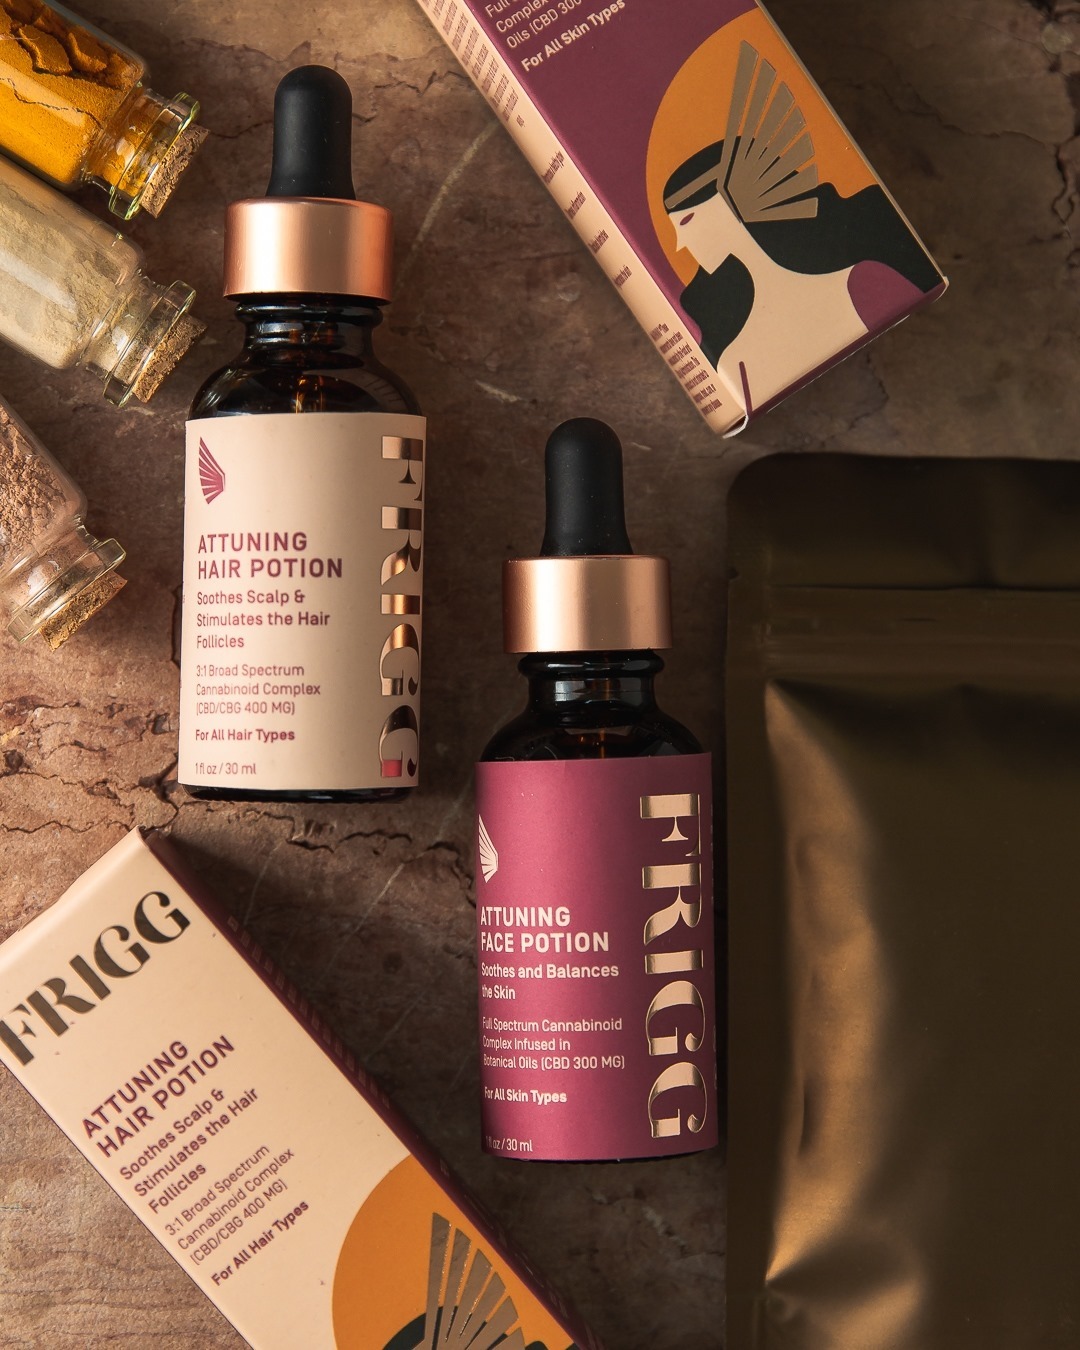 10 Sustainable CBD Brands To Know About via eco club